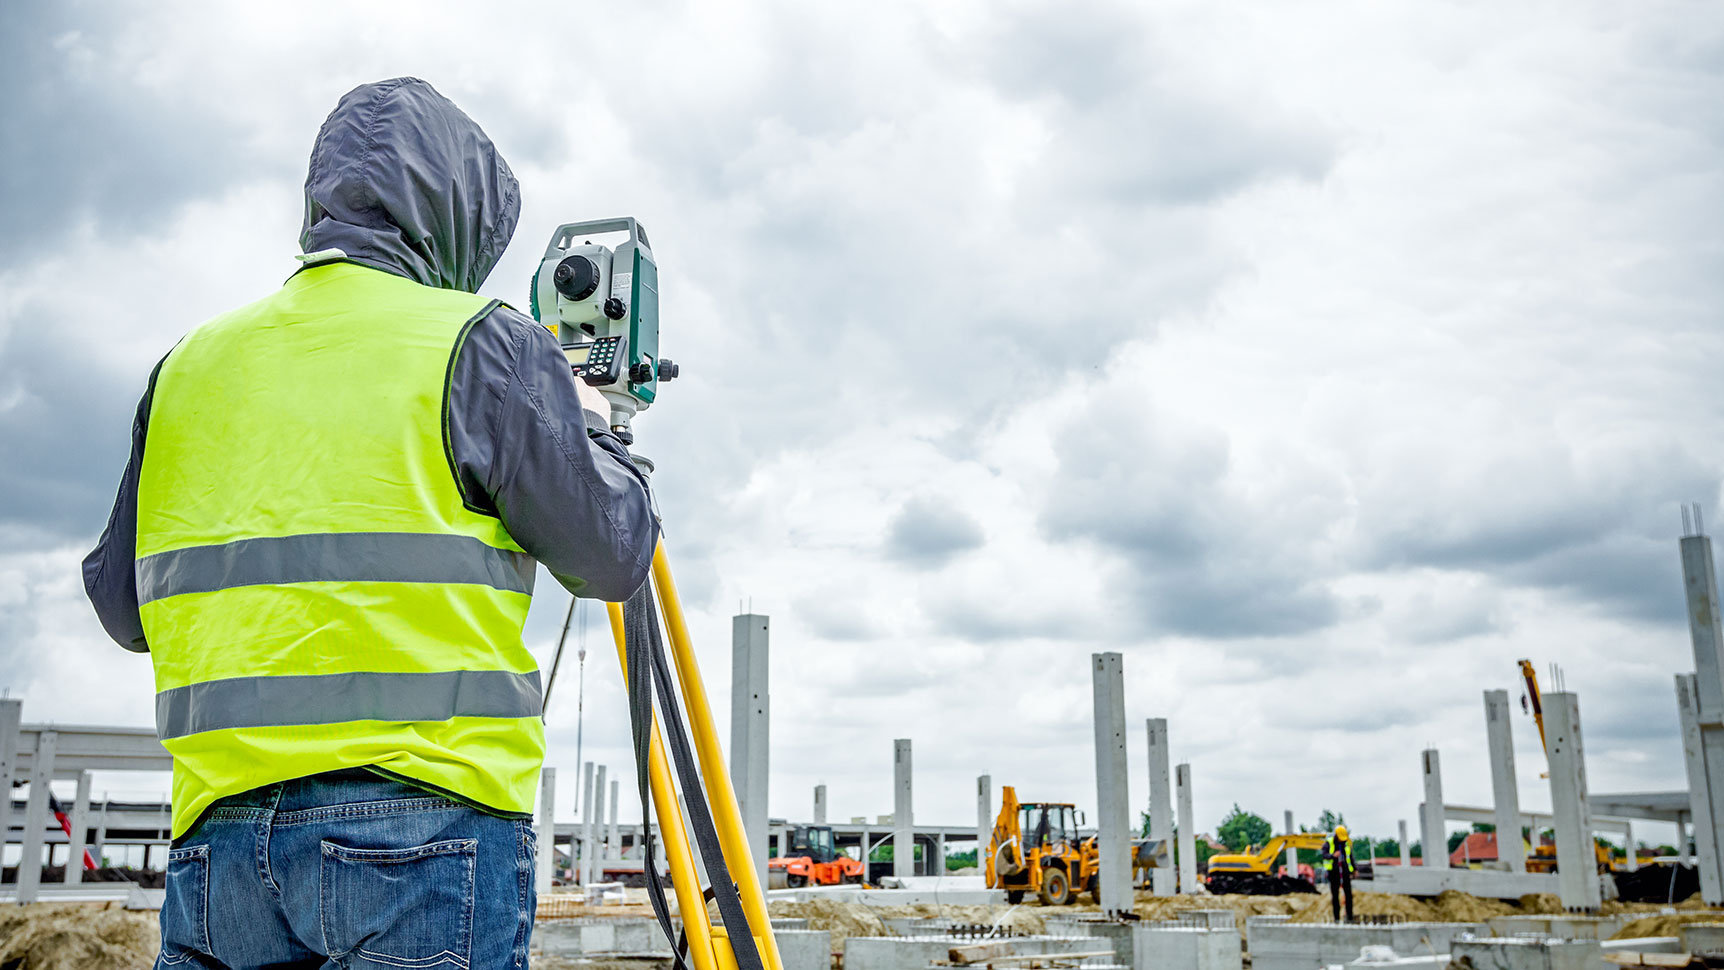 A close up of a person with a safety vest and surveying equipment